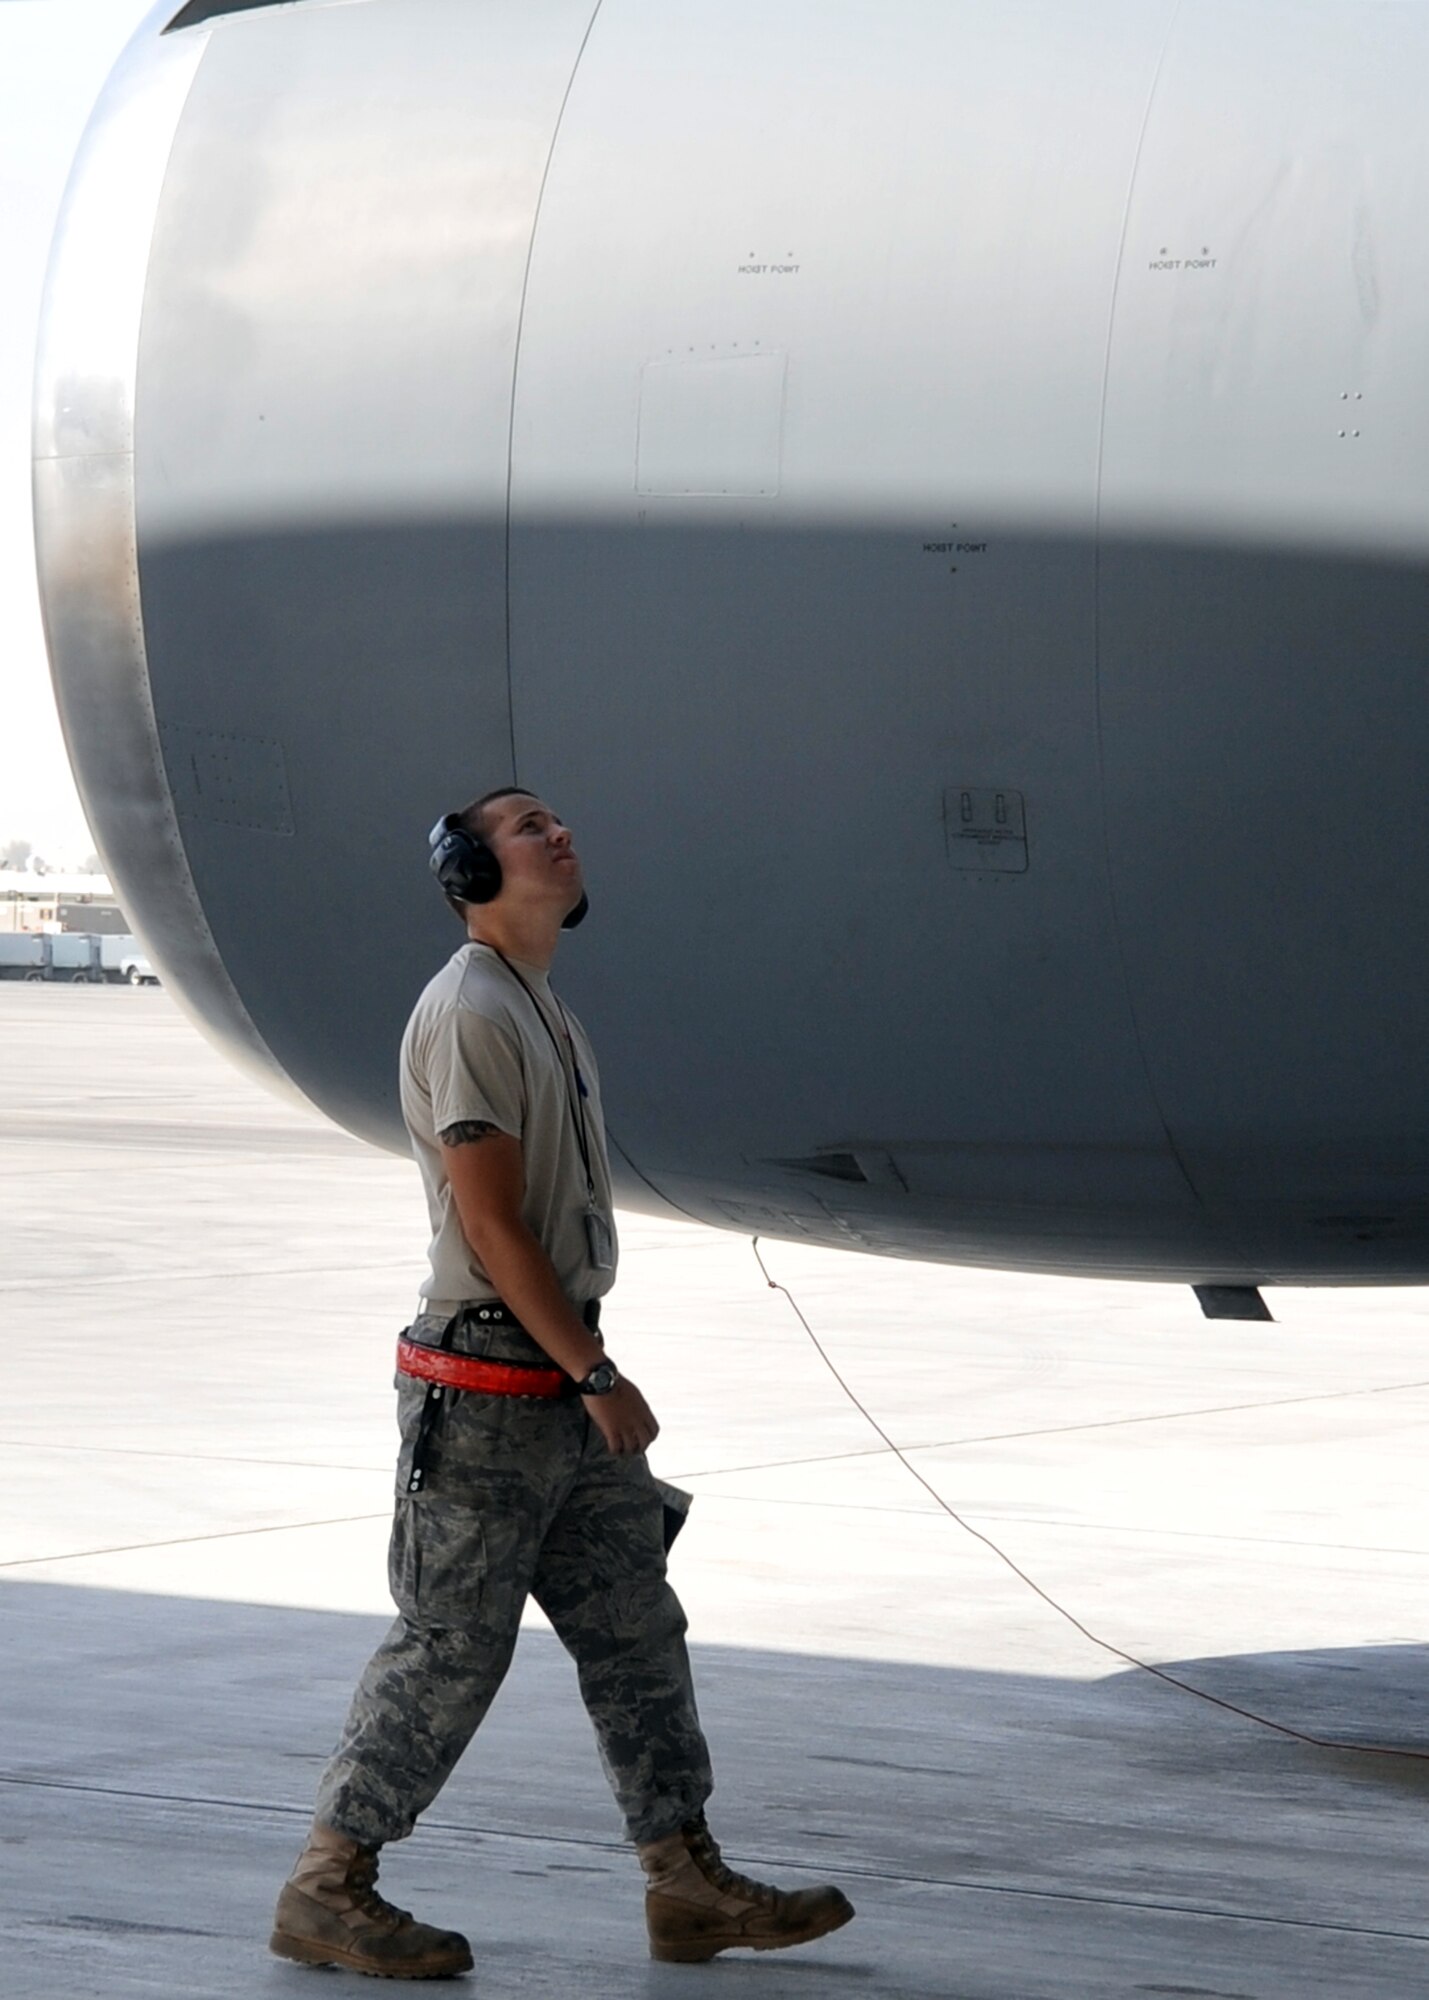 Staff Sgt. Nicholas Shoenhair, KC-10 Extender crew chief with the 380th Expeditionary Aircraft Maintenance Squadron Extender aircraft maintenance unit, looks over the engine of the KC-10 during operations on the flightline for the 380th Air Expeditionary Wing at a non-disclosed base in Southwest Asia. Sergeant Shoenhair is deployed from the 660th Aircraft Maintenance Squadron at Travis Air Force Base, Calif., and his hometown is Fort Meyers, Fla. (U.S. Air Force Photo/Master Sgt. Scott T. Sturkol/Released)